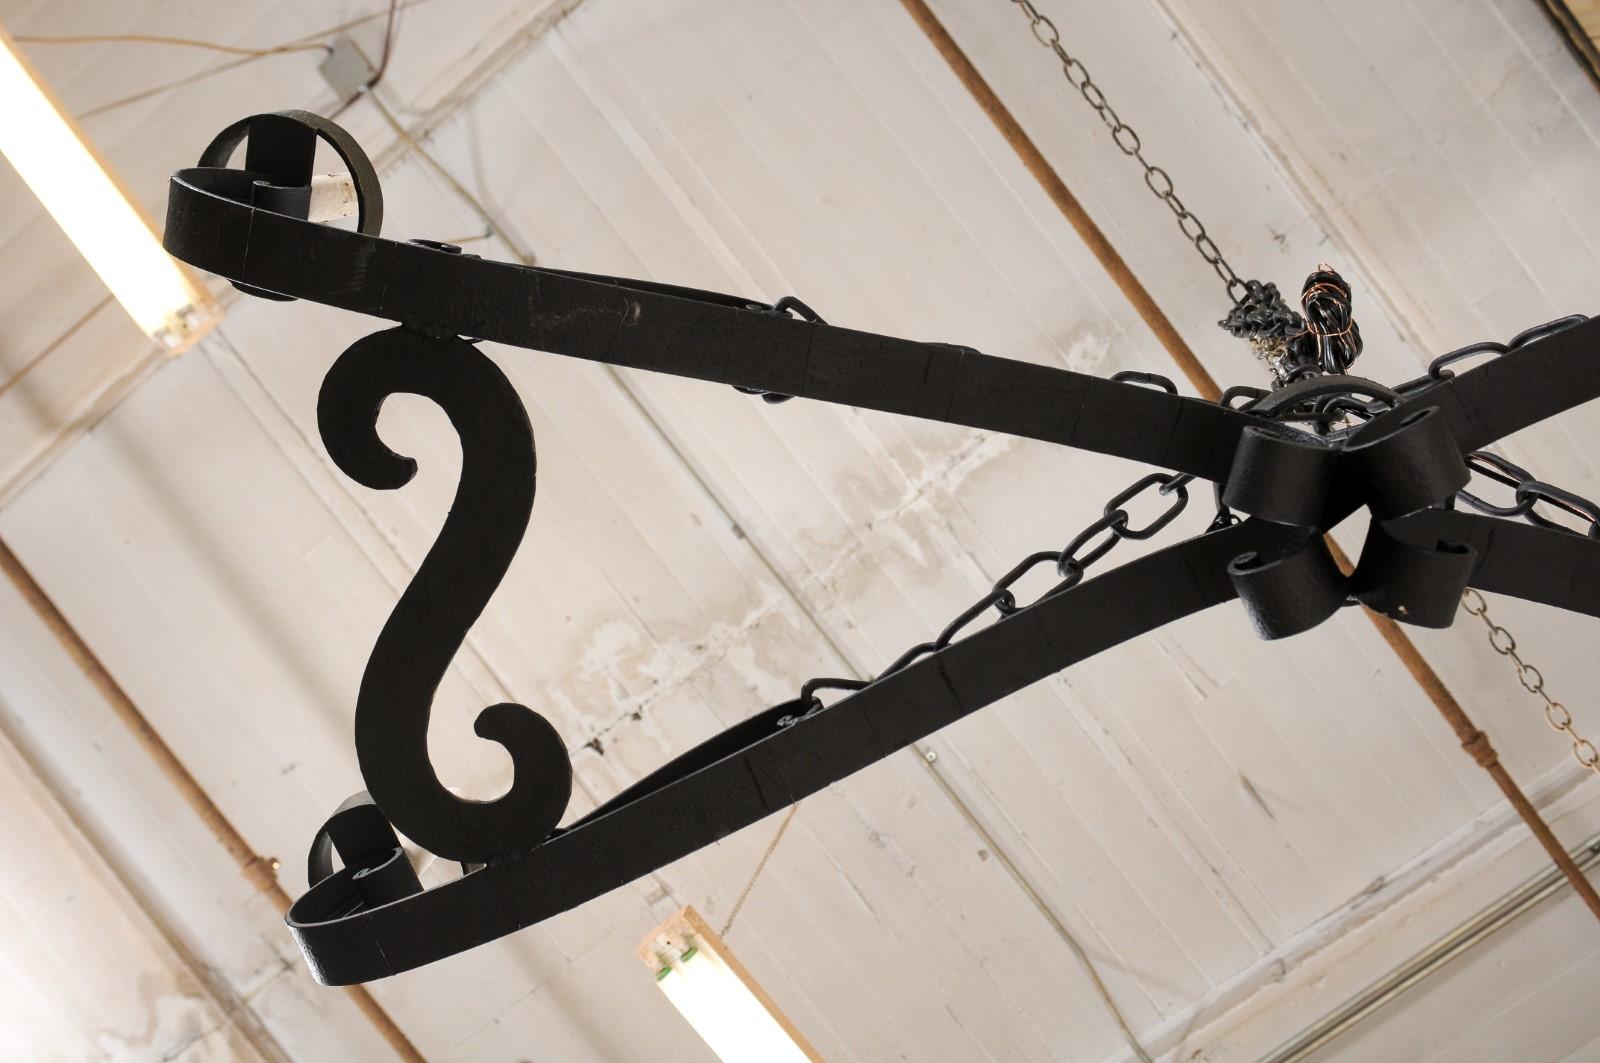 An Elegant French Wrought Iron Chandelier a Great Large Size of 5+ Ft in Length! 4